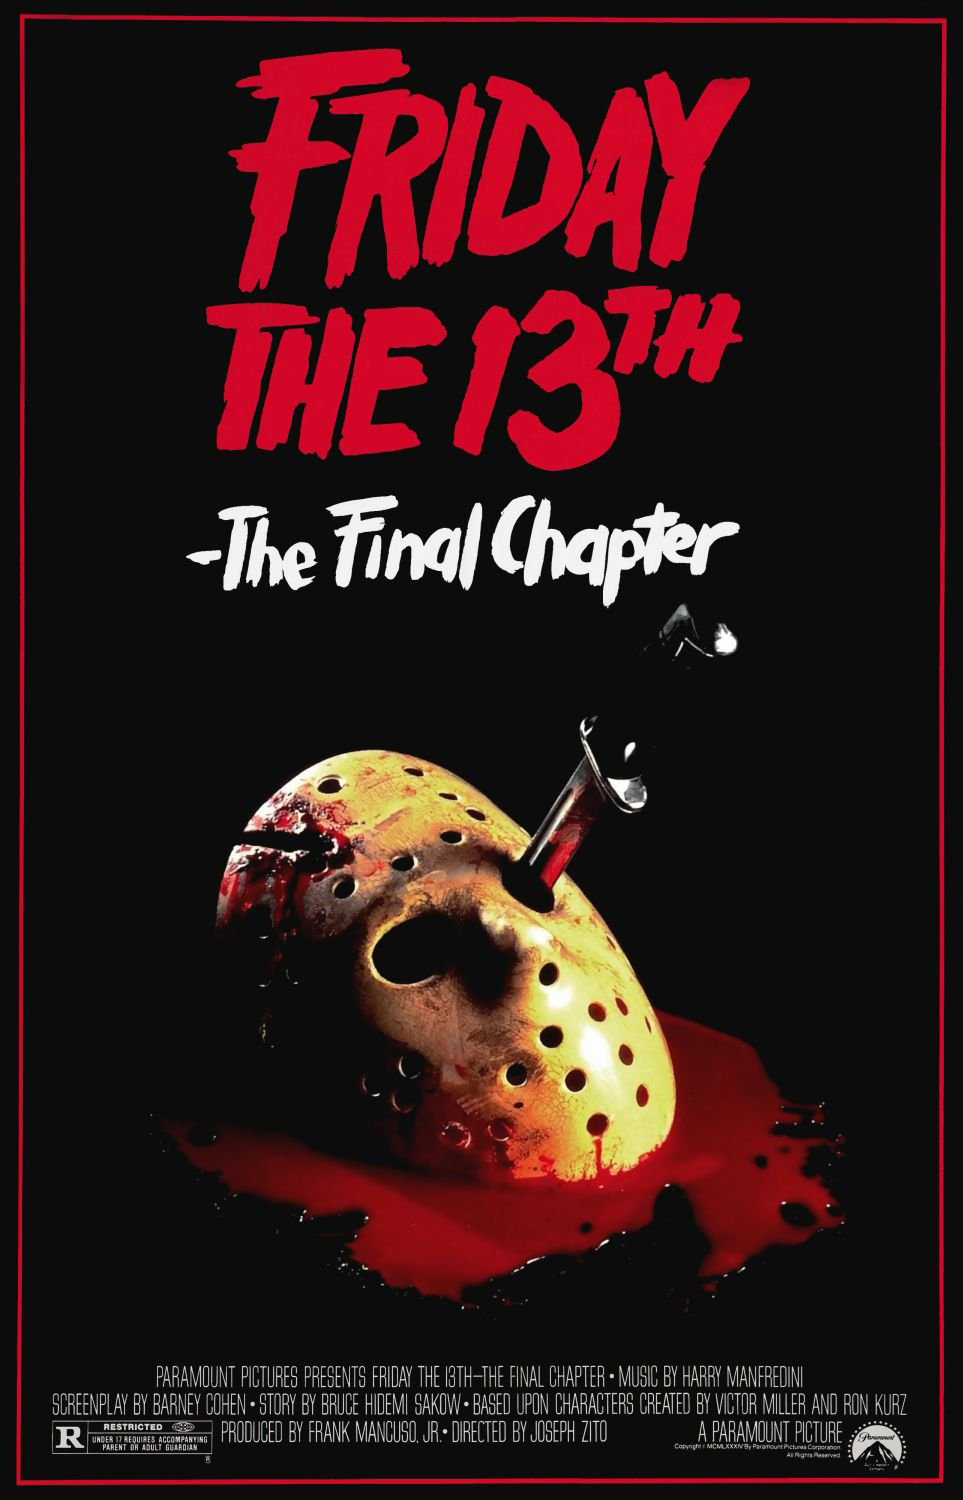 ‘Friday the 13th’ inspires trends in horror films The Baylor Lariat